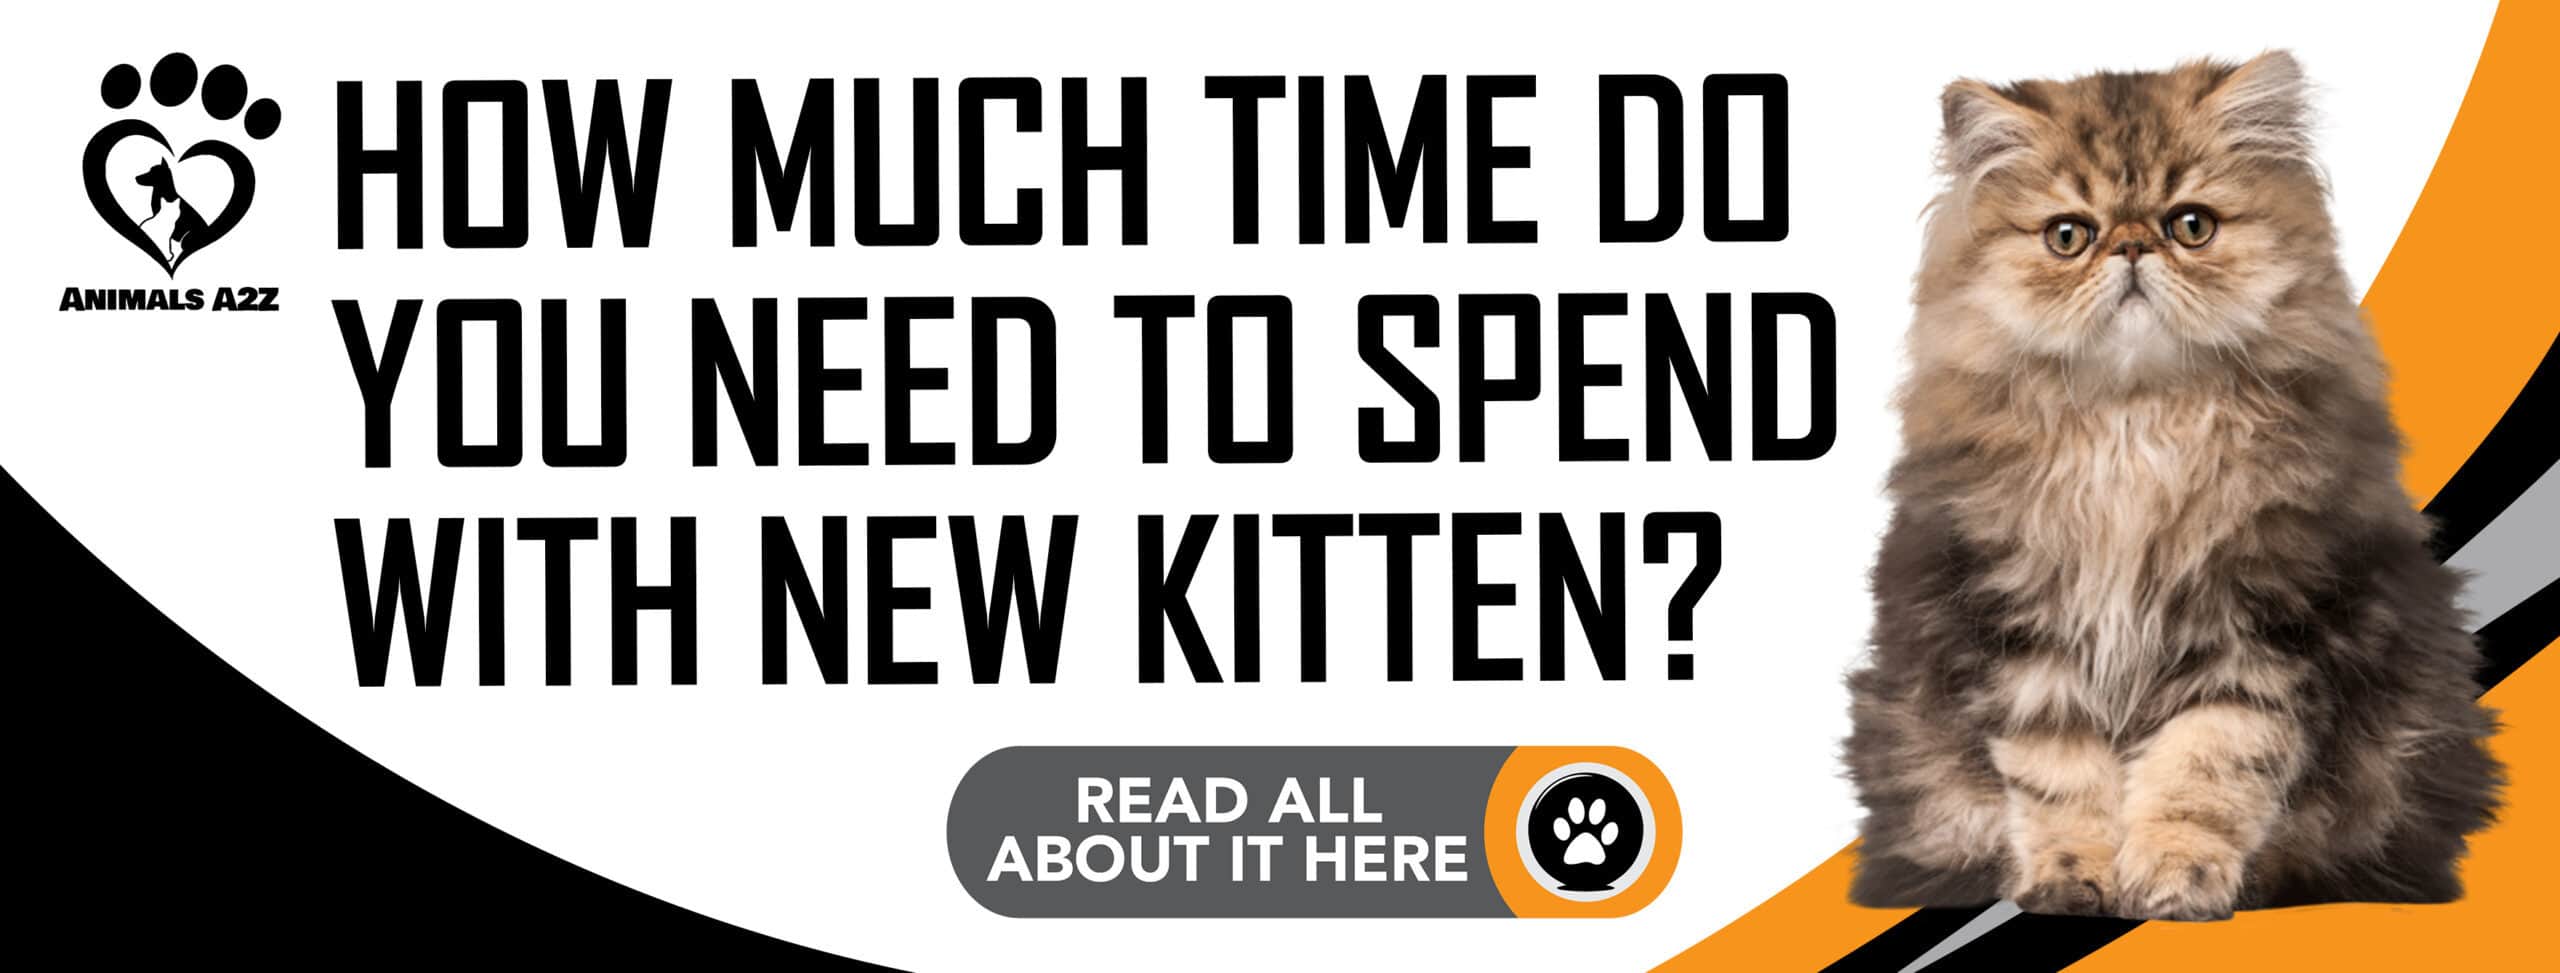 How much time do you need to spend with your new kitten?